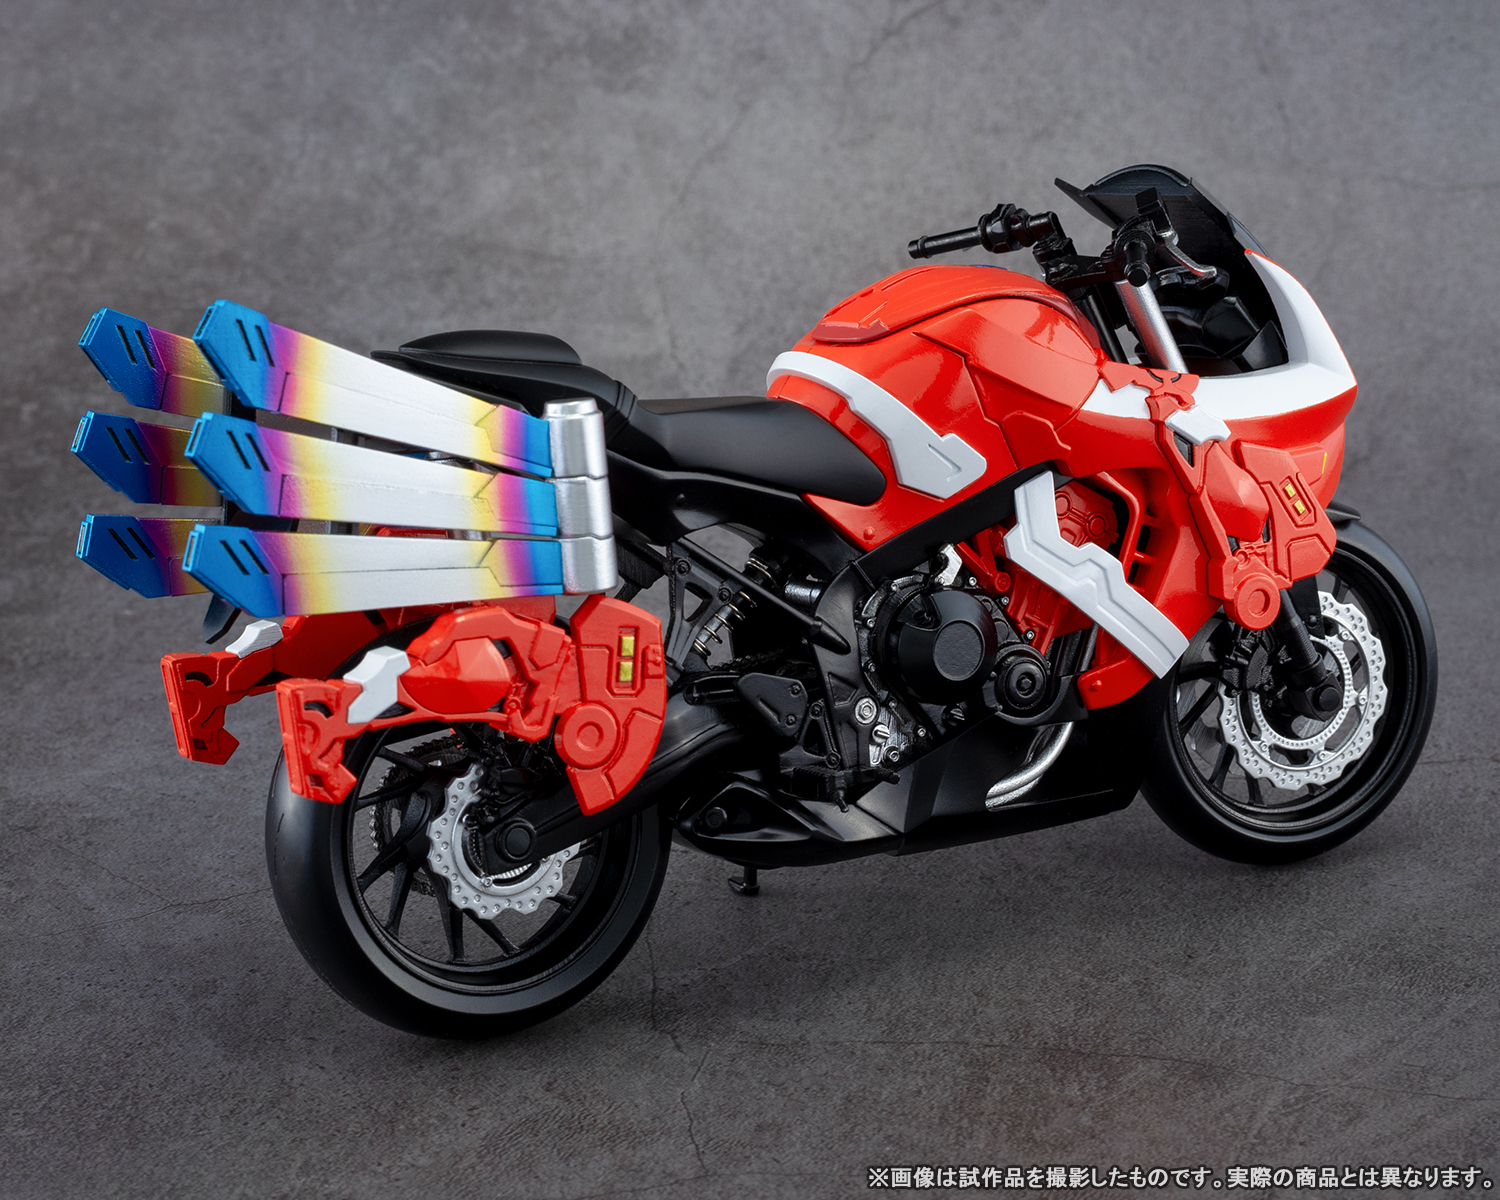 Intense shots of the latest two machines in the "Kamen Rider" series! Tamashii web shop Ordering S.H.Figuarts" GOLDDASH" and "BOOSTRIKER" Introduction of the new shots!